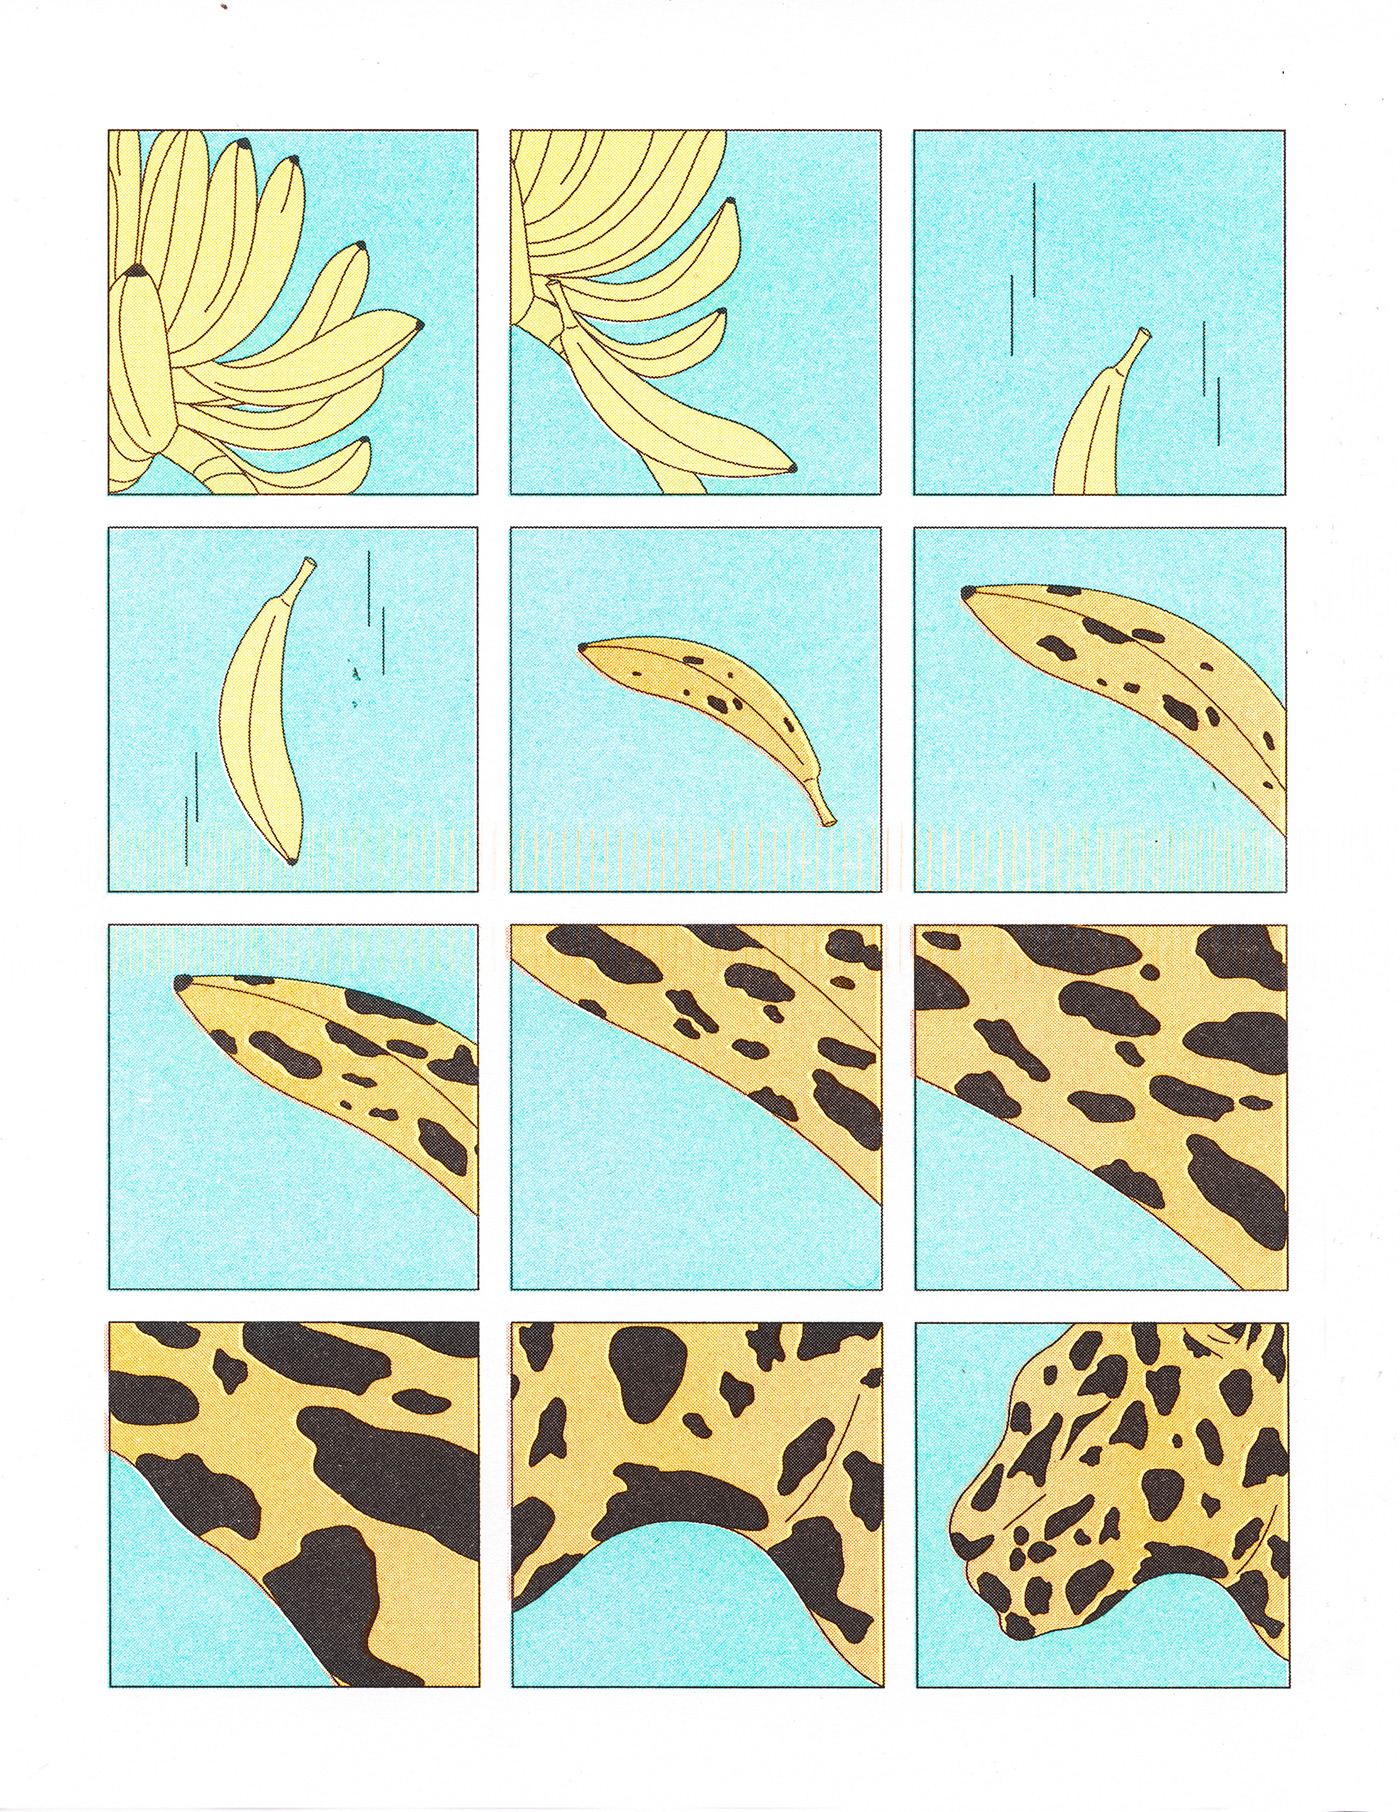 Absurd comic daily Food  panels prints Repetition Riso Wordless